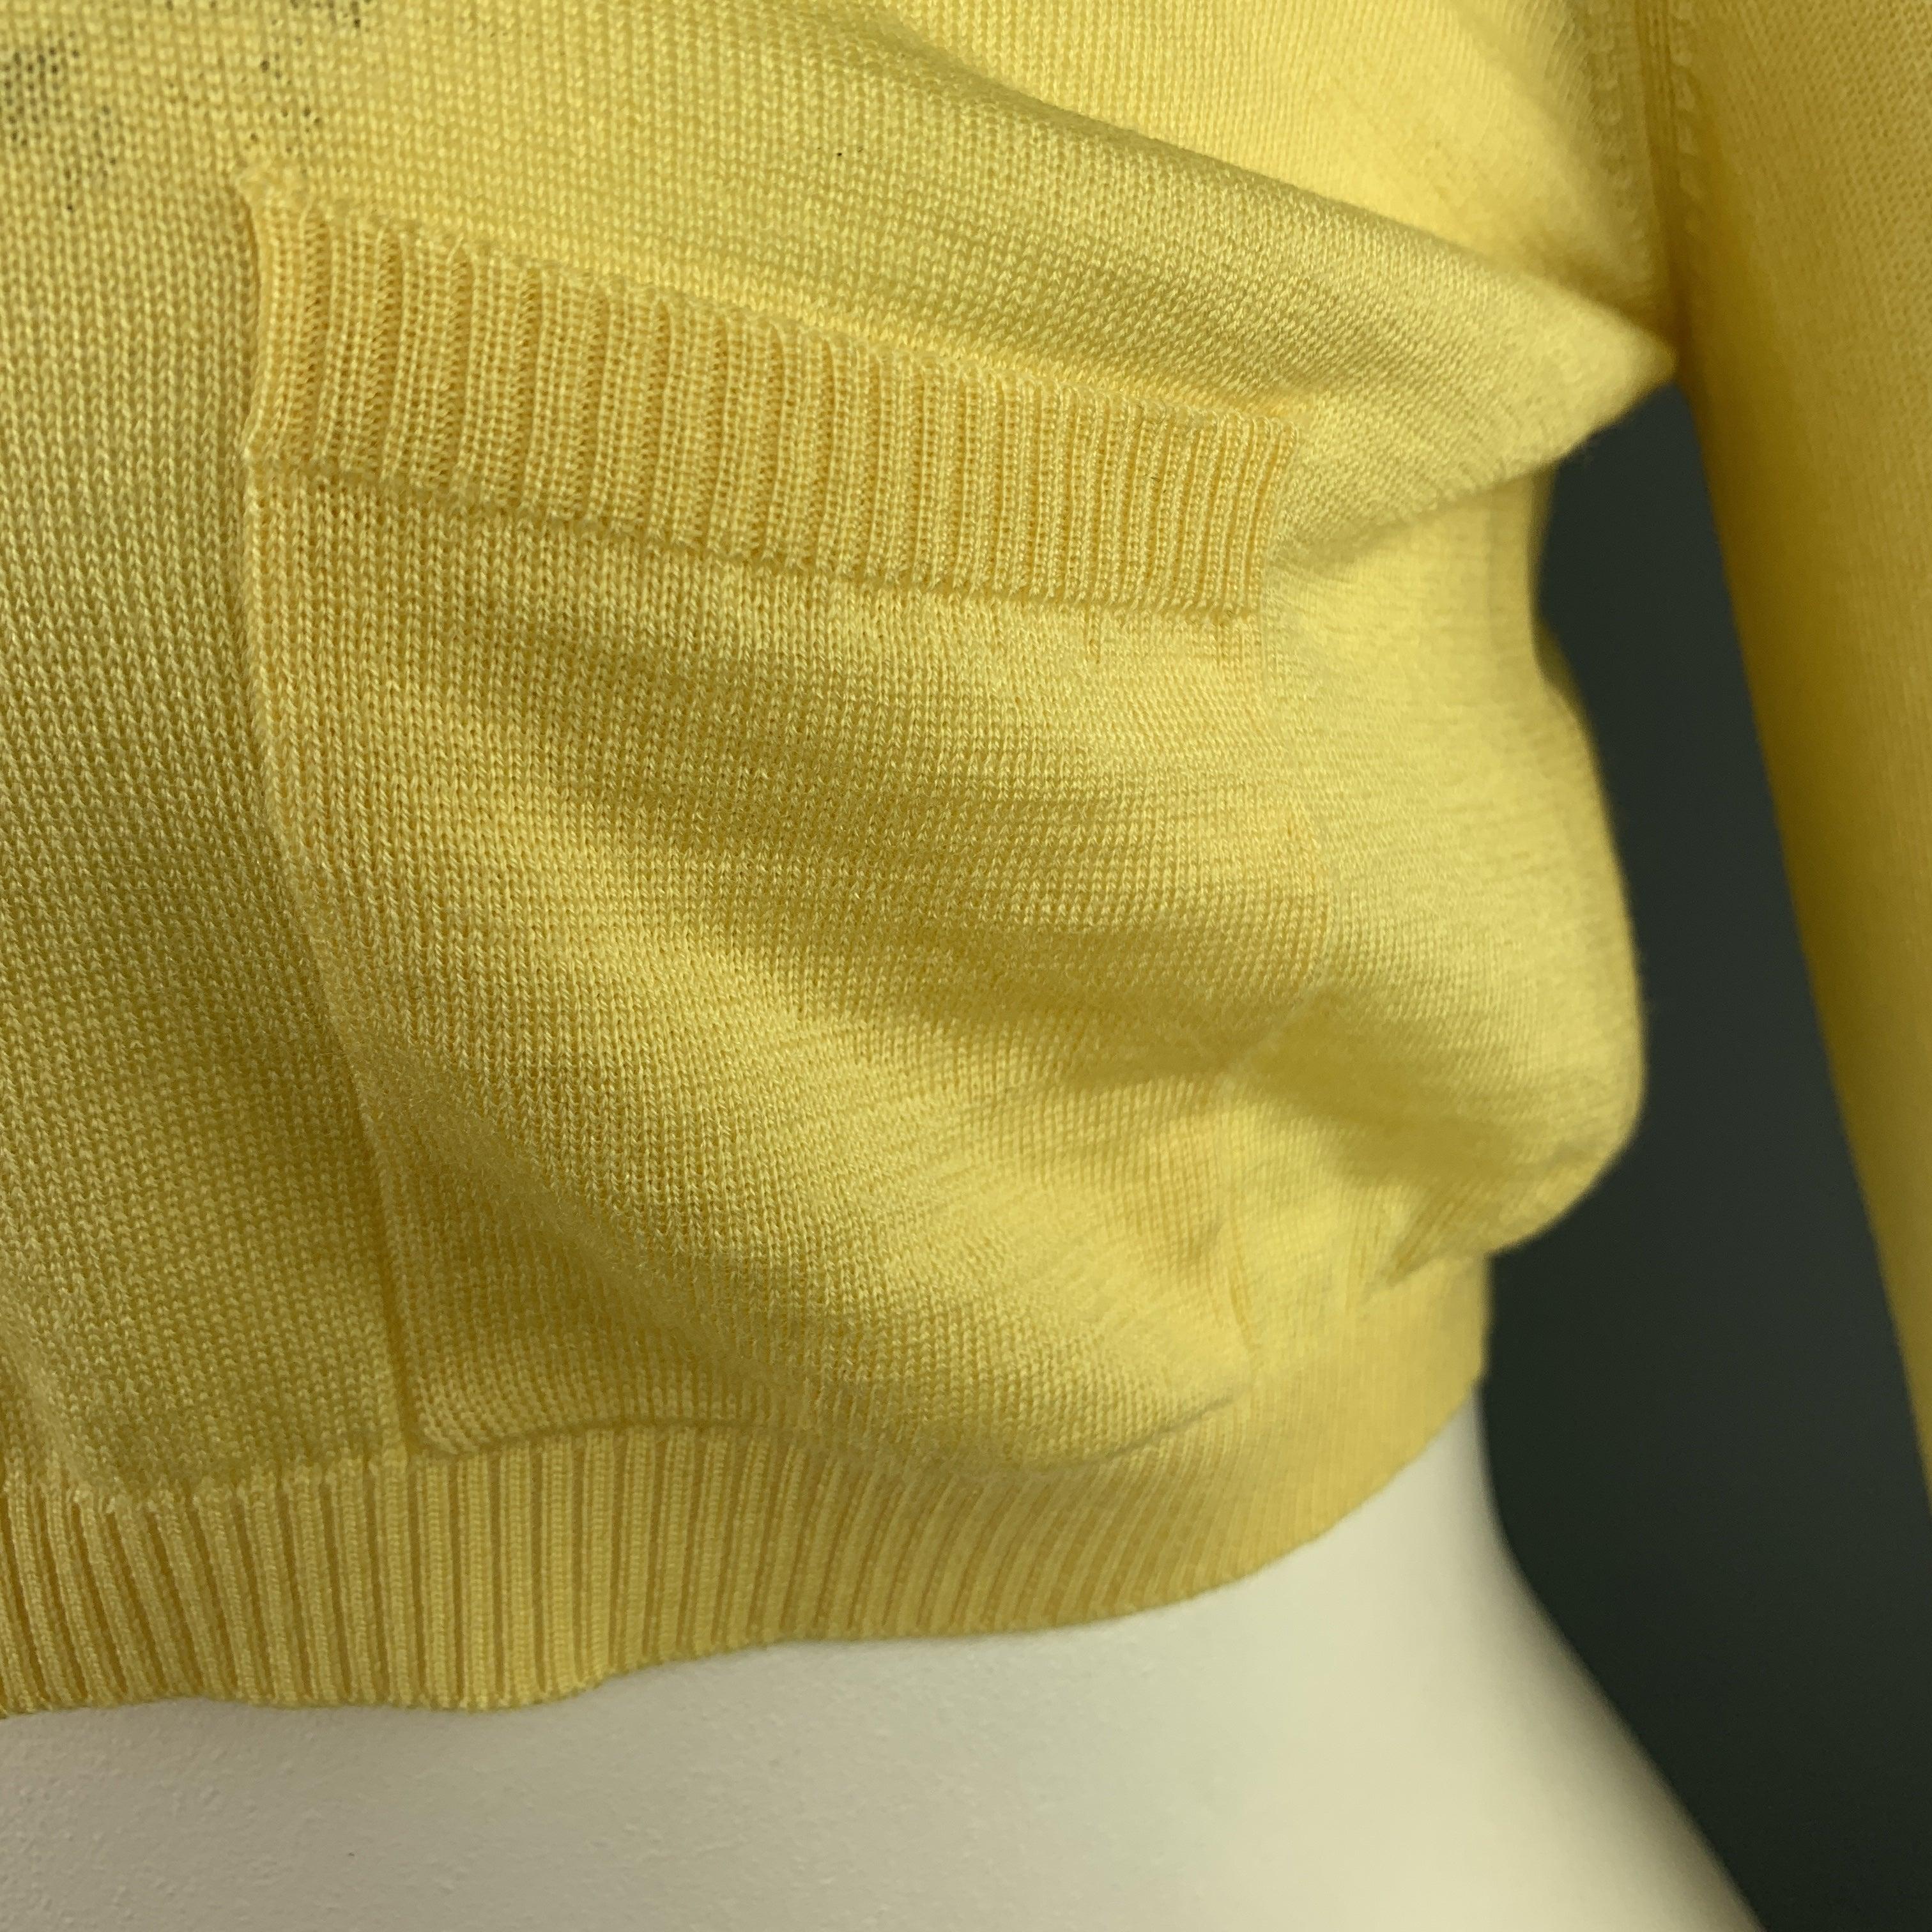 VALENTINO cardigan comes in pastel yellow wool blend knit with a round neck, cropped hem, and patch pocket. Made in Italy.
Very Good
Pre-Owned Condition. 

Marked:   L 

Measurements: 
 
Shoulder: 16 inches Bust:
36 inches Sleeve:
18 inches Length: